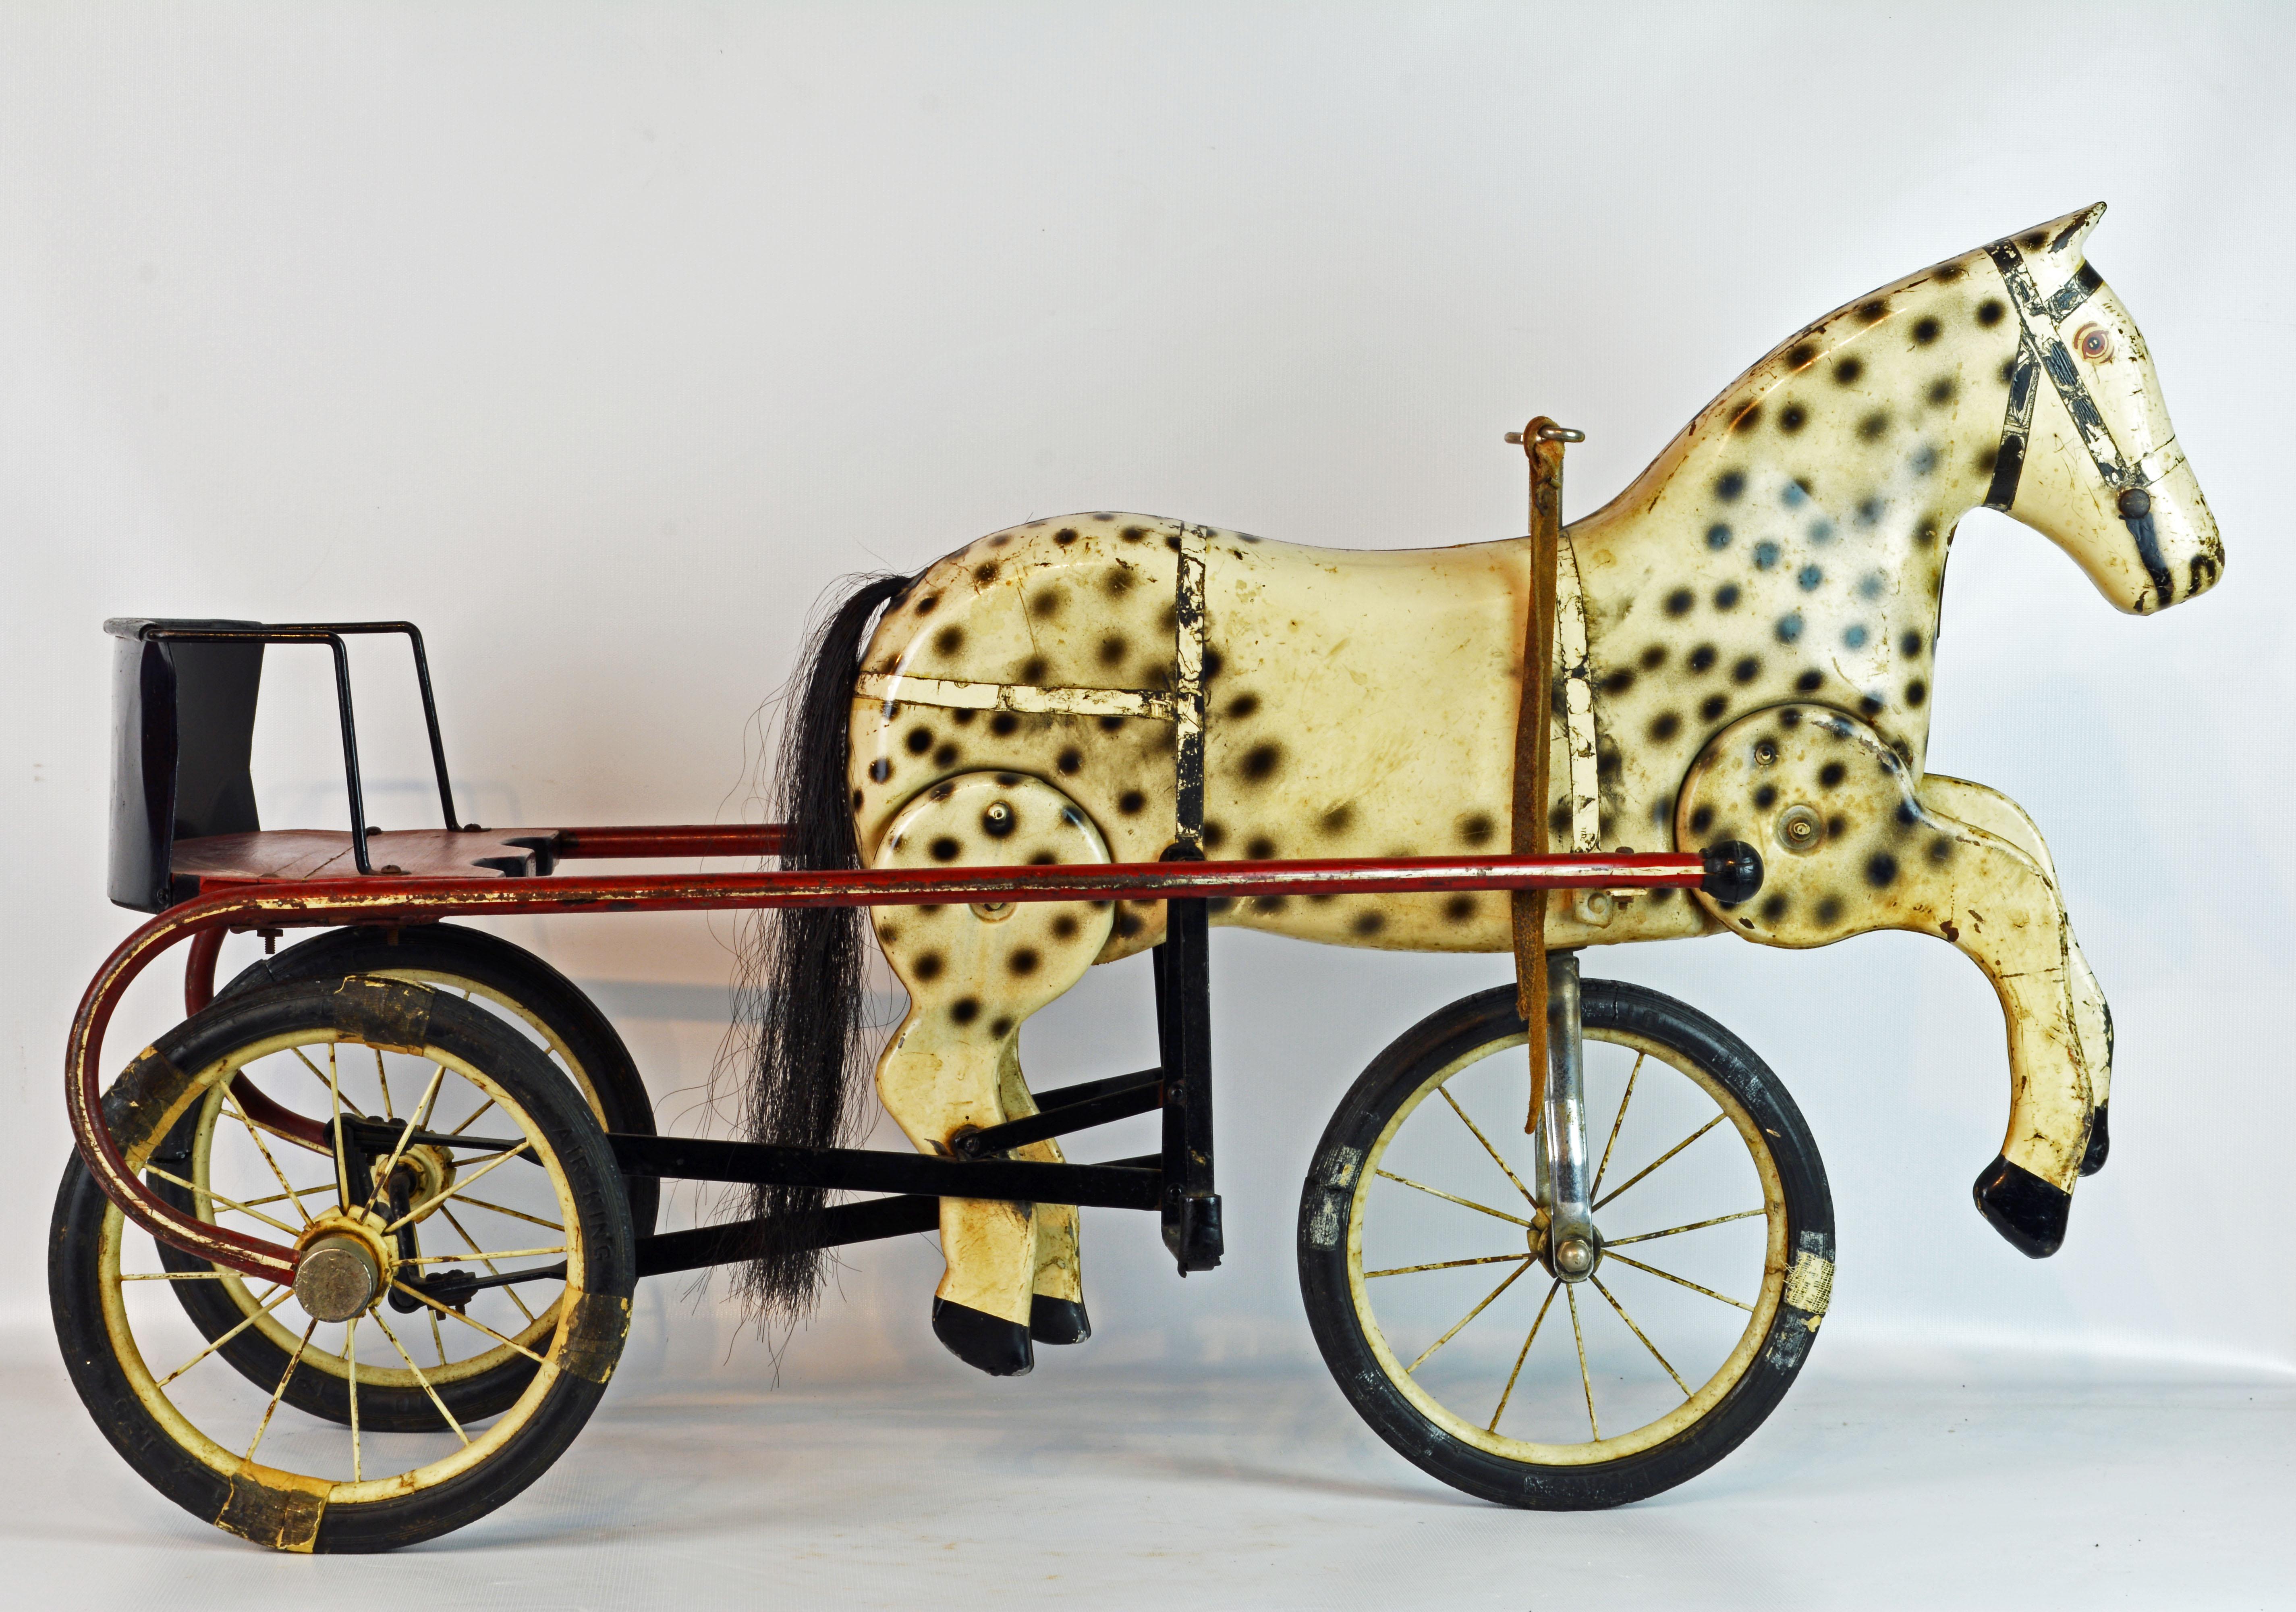 This sulky style pedal tricycle features a seat supported by two wheels and an intriguing tole horse mounted on the front wheel in a way that lets the horse legs move as the tricycle moves forward.